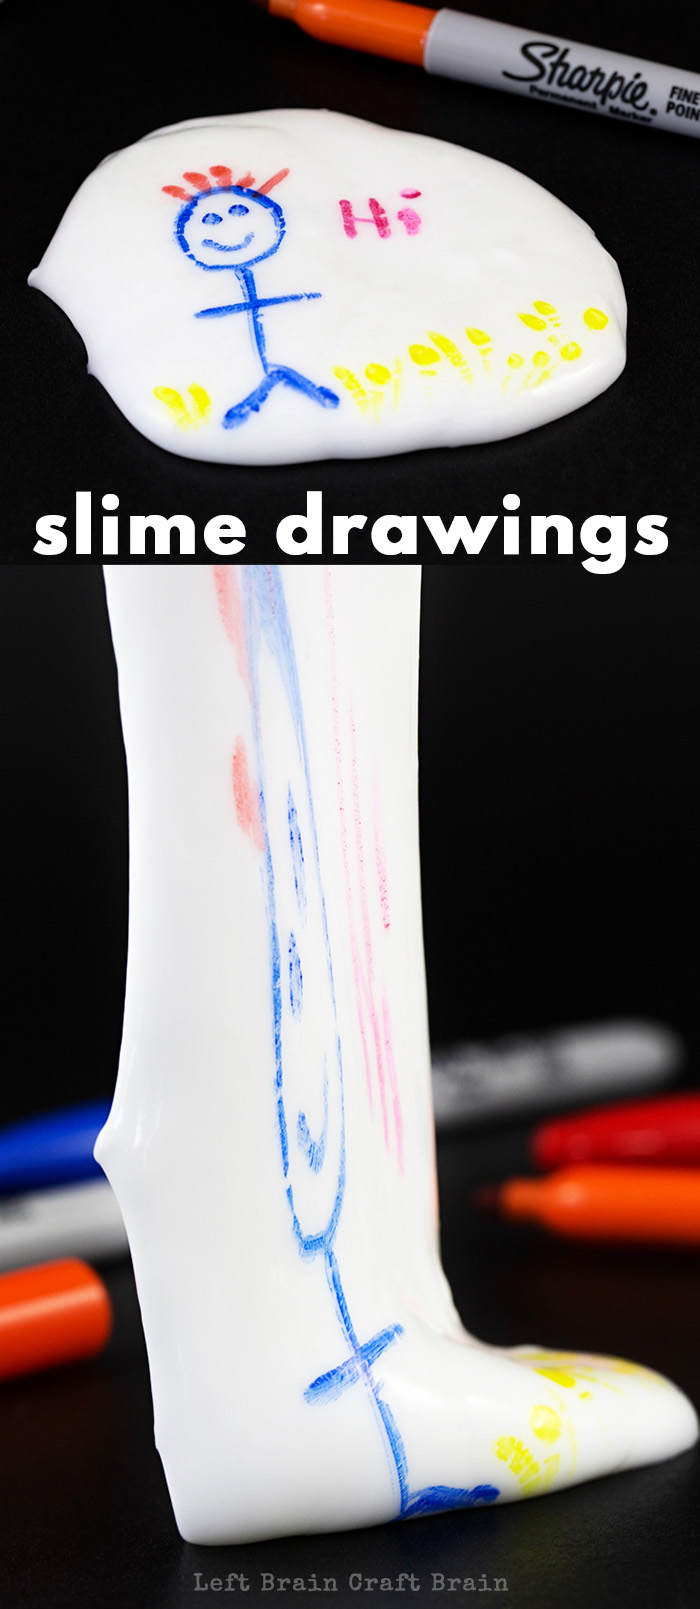 Slime drawings put a new spin on an old standby by using slime as a canvas for your art. Just draw, stretch and have fun! Five minute crafts made fun.